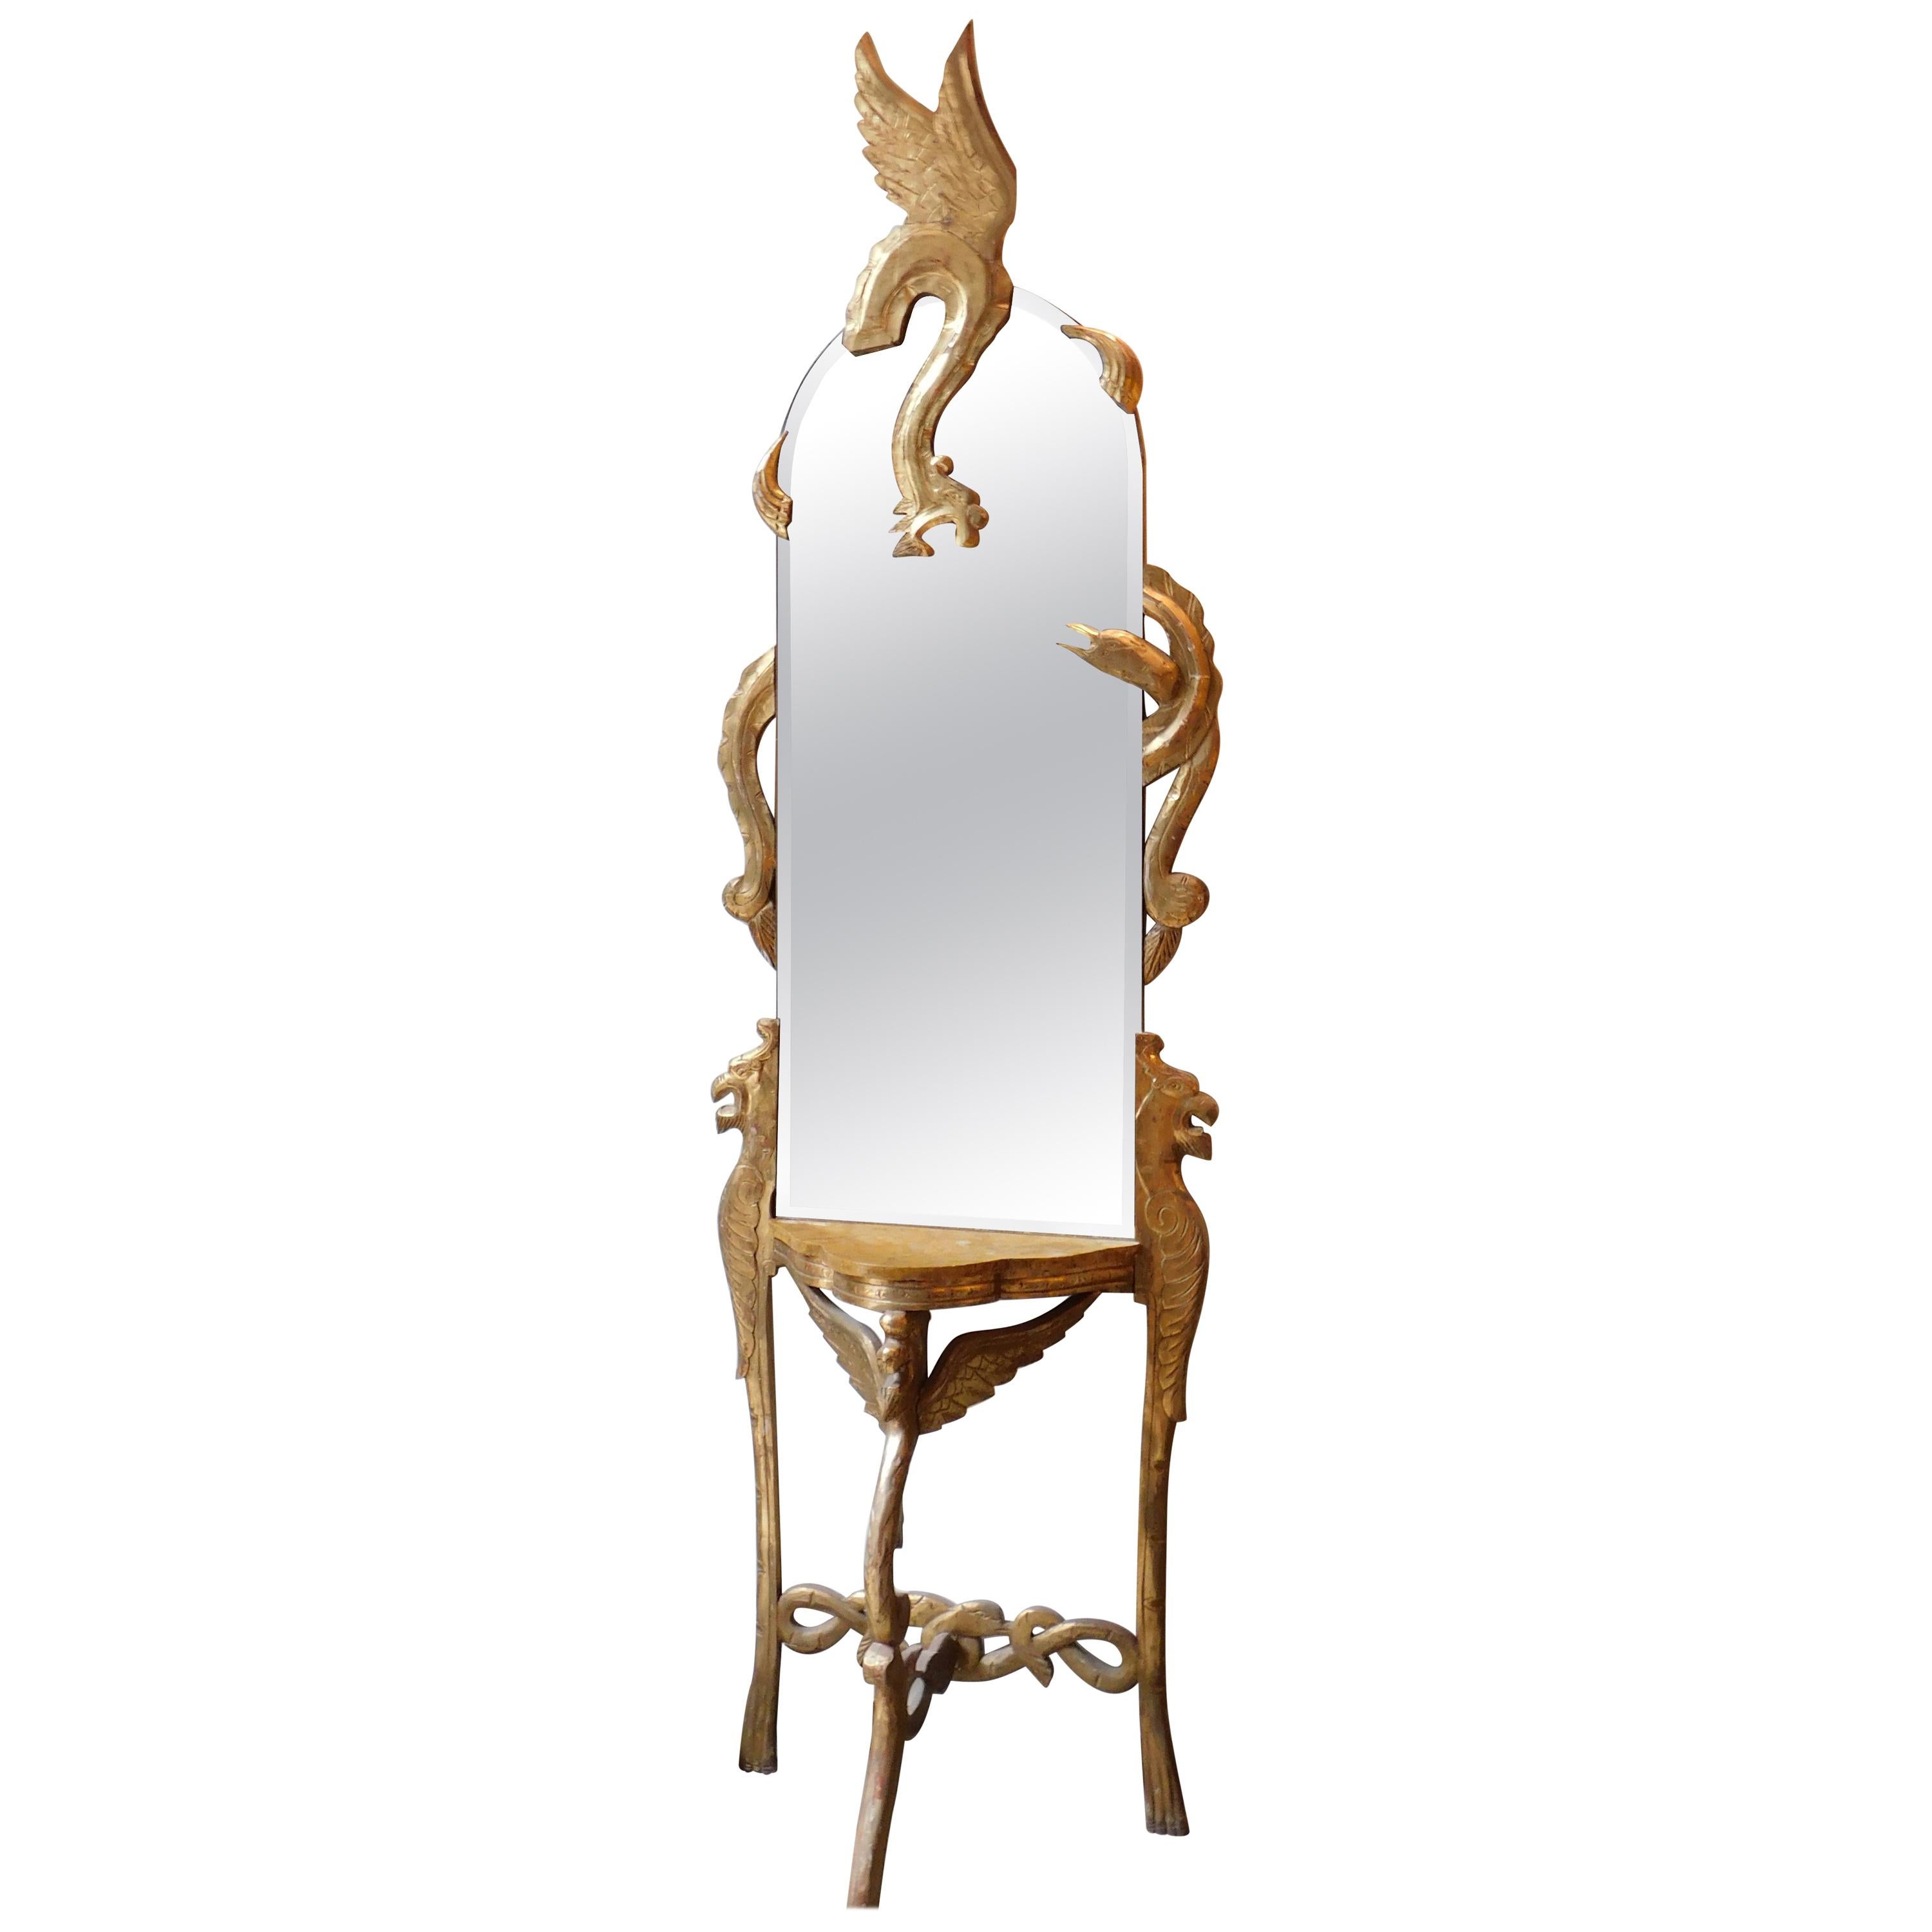 Italian Art Deco Giltwood Console Table or Mirror with Mythical Beast